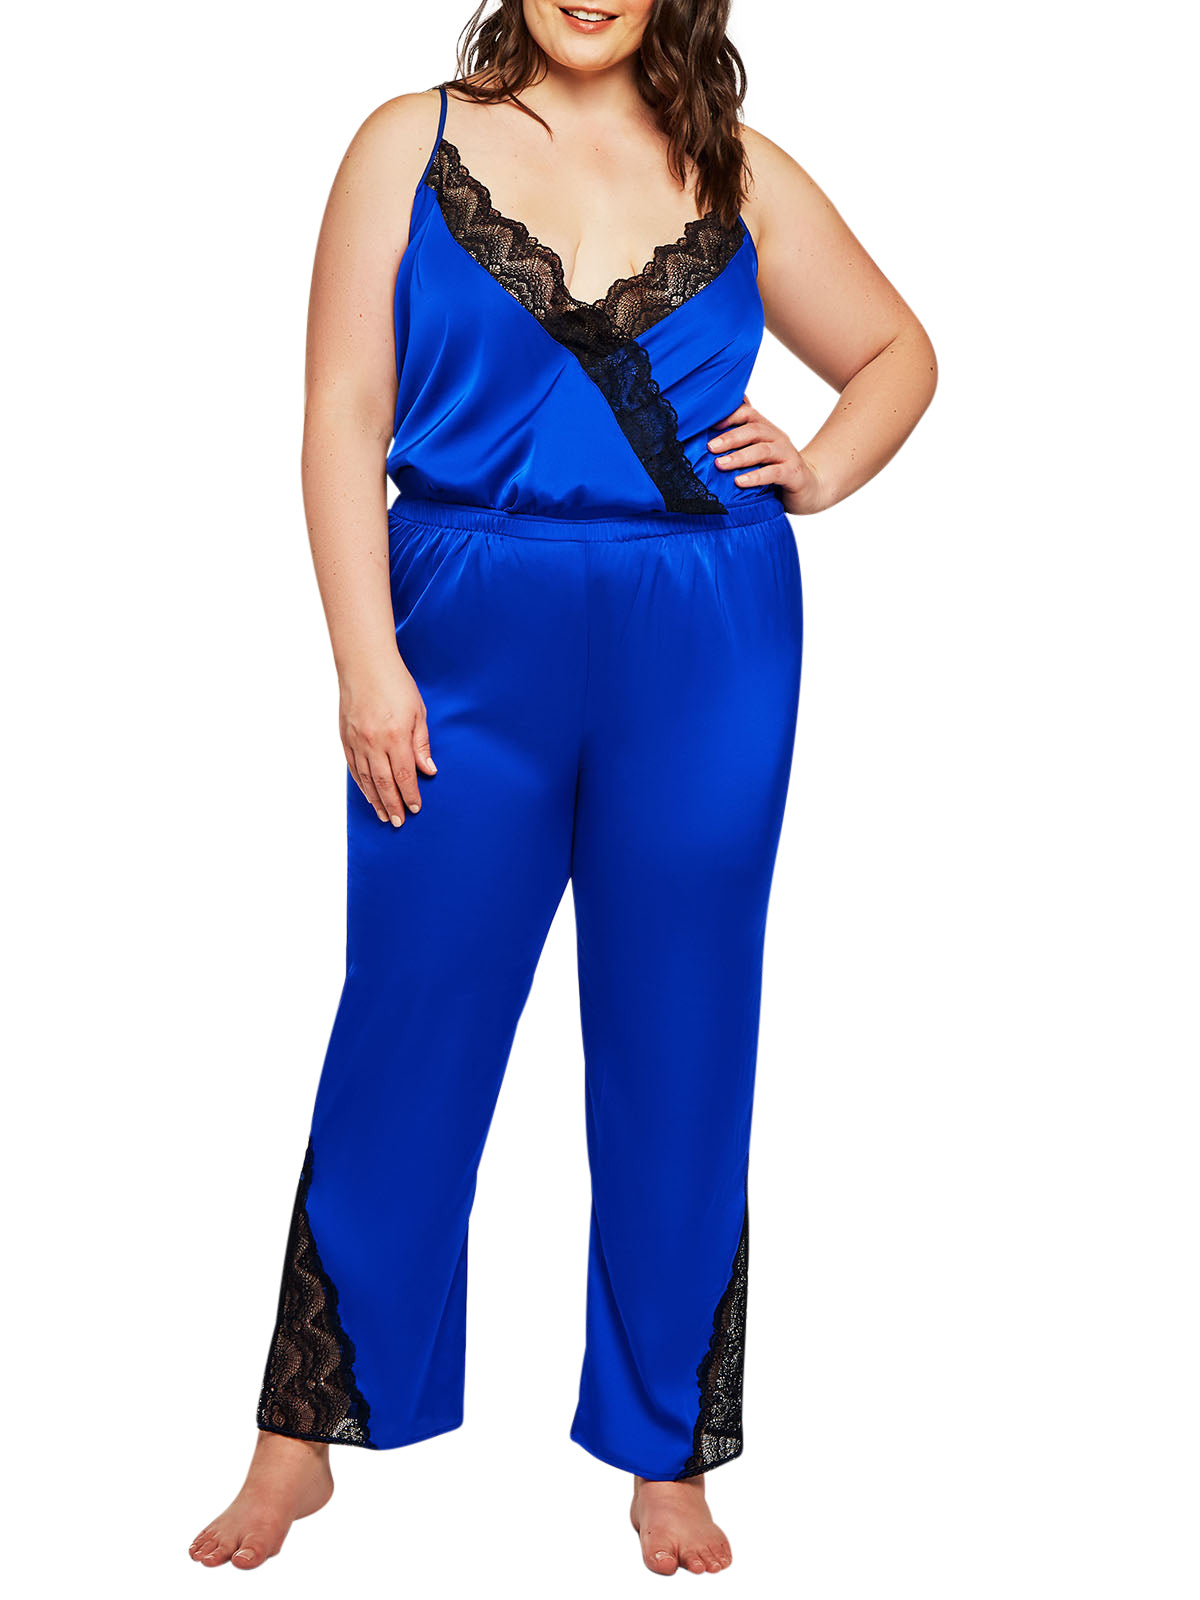 iCollection Rompers Tess Plus Size Jumpsuit